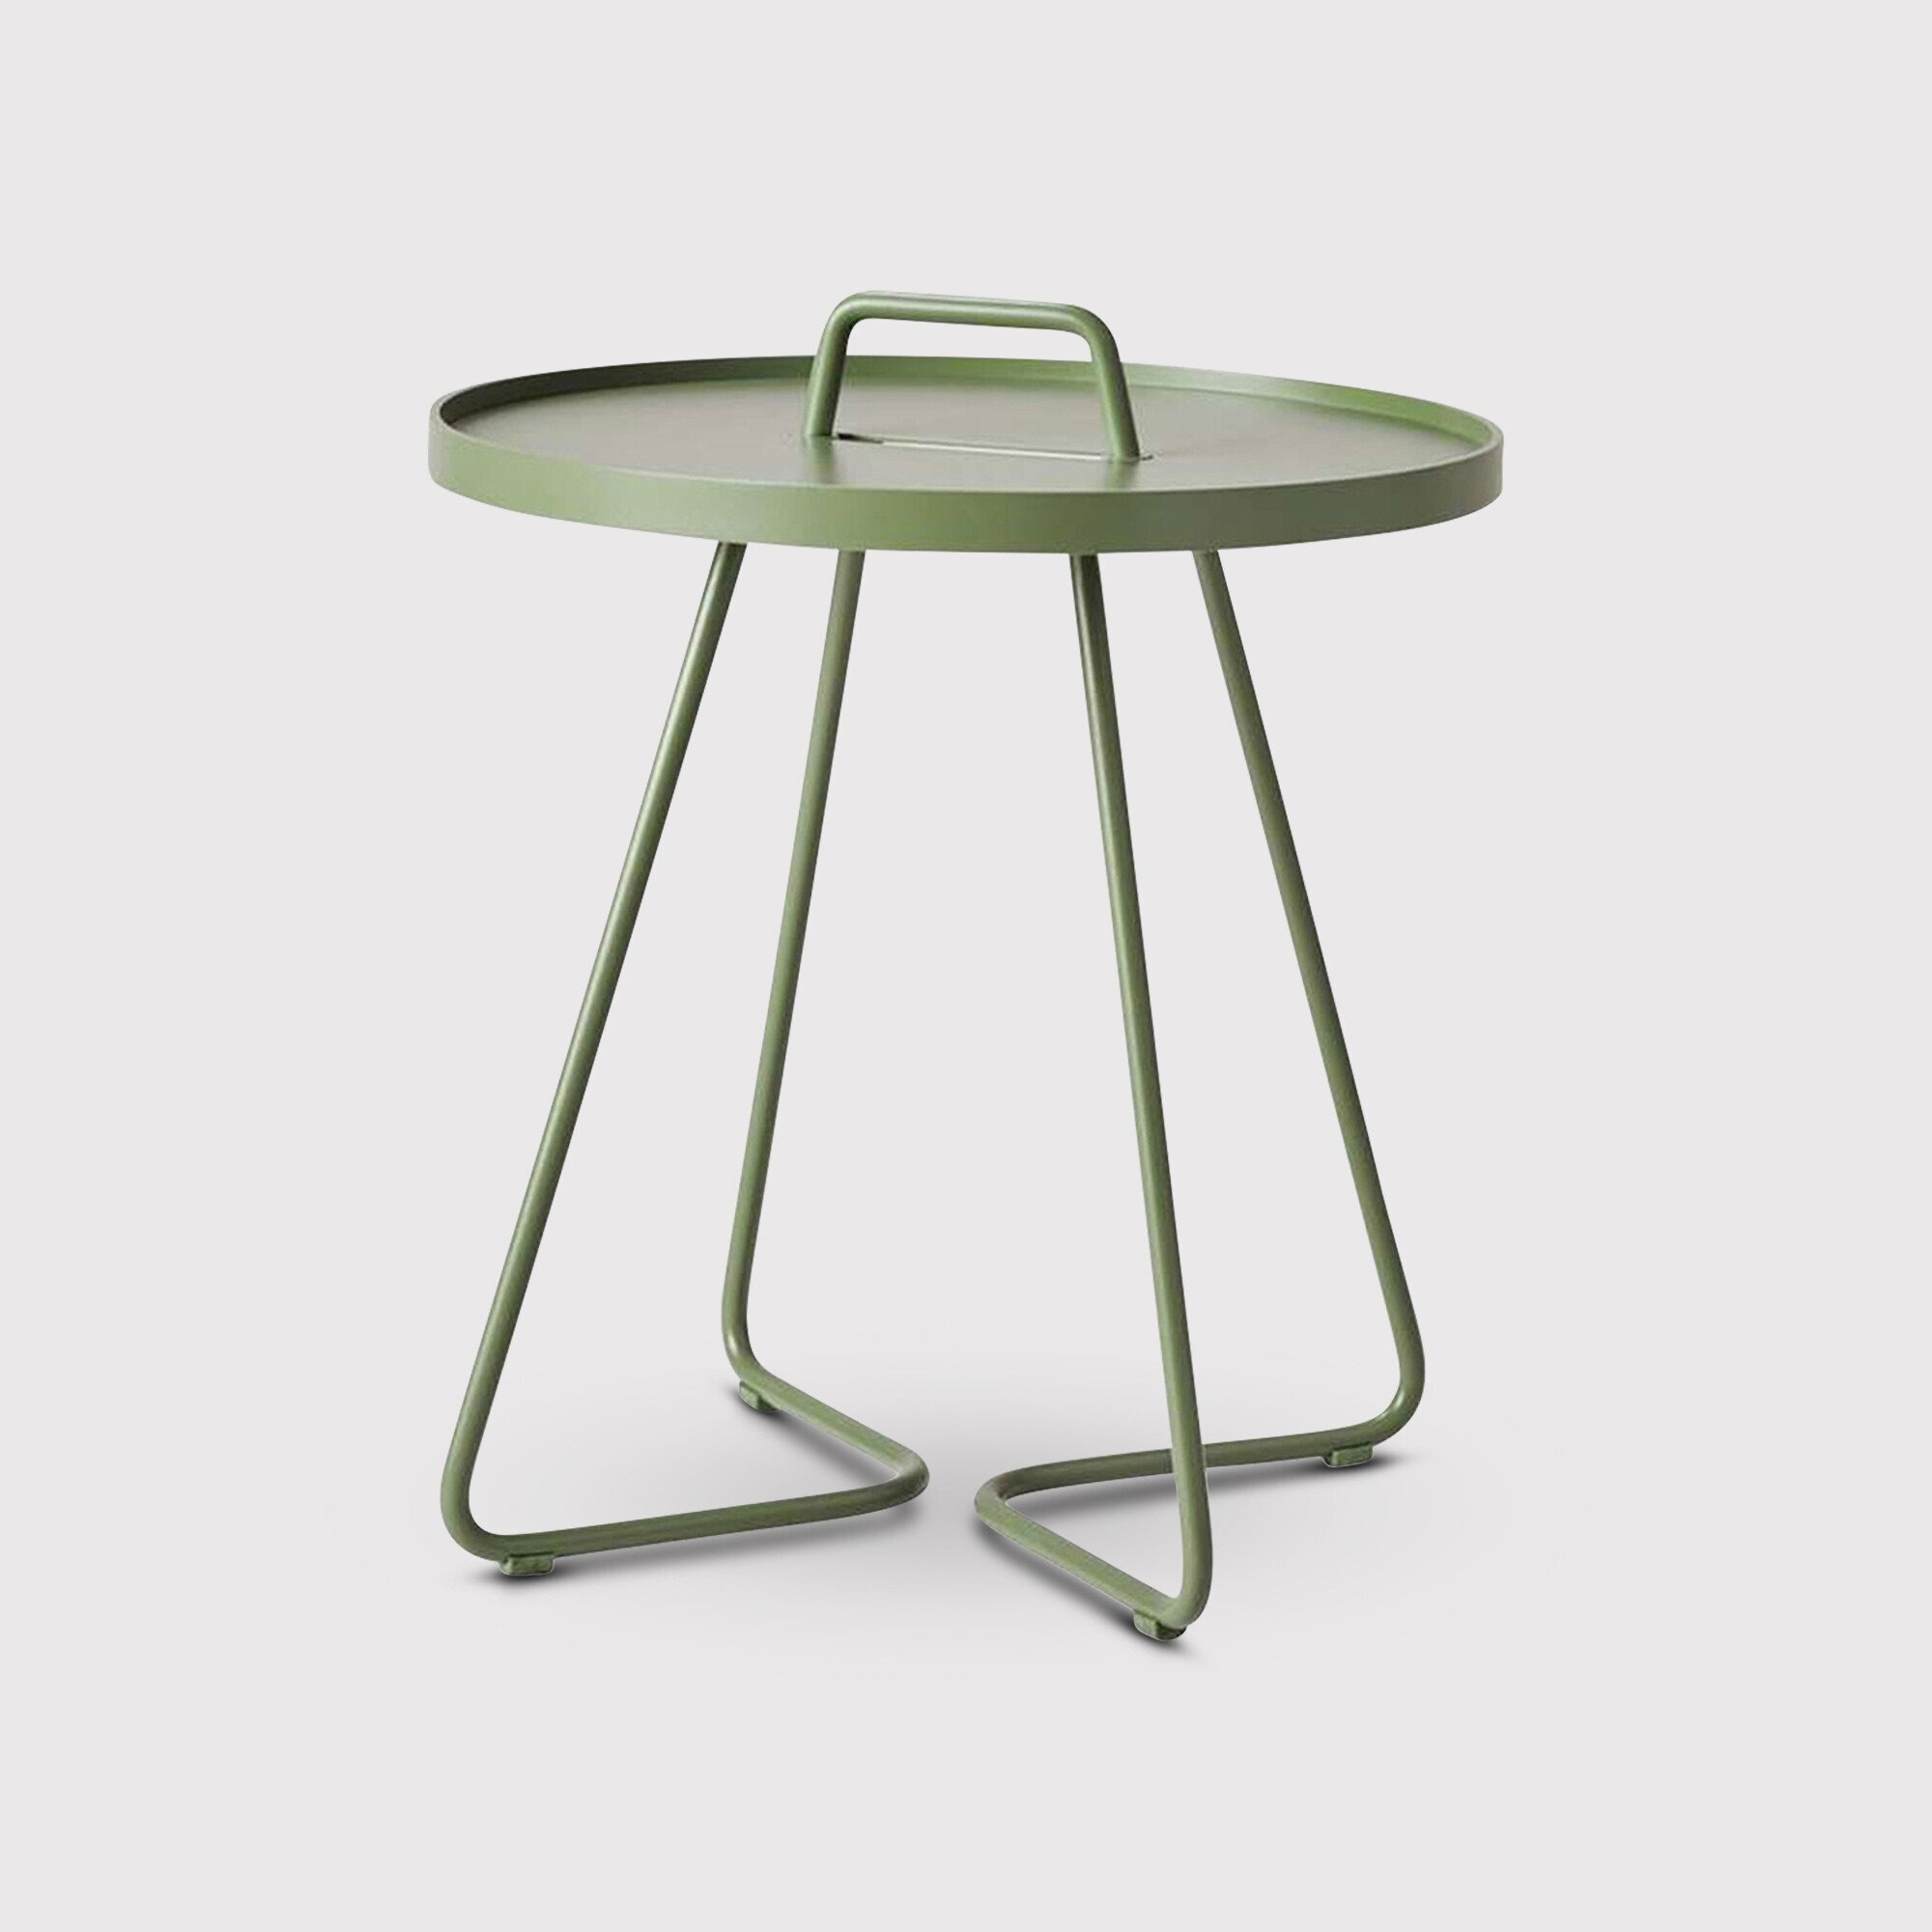 Cane Line On The Move Small Side Table, Round, Green Metal - Barker & Stonehouse - image 1